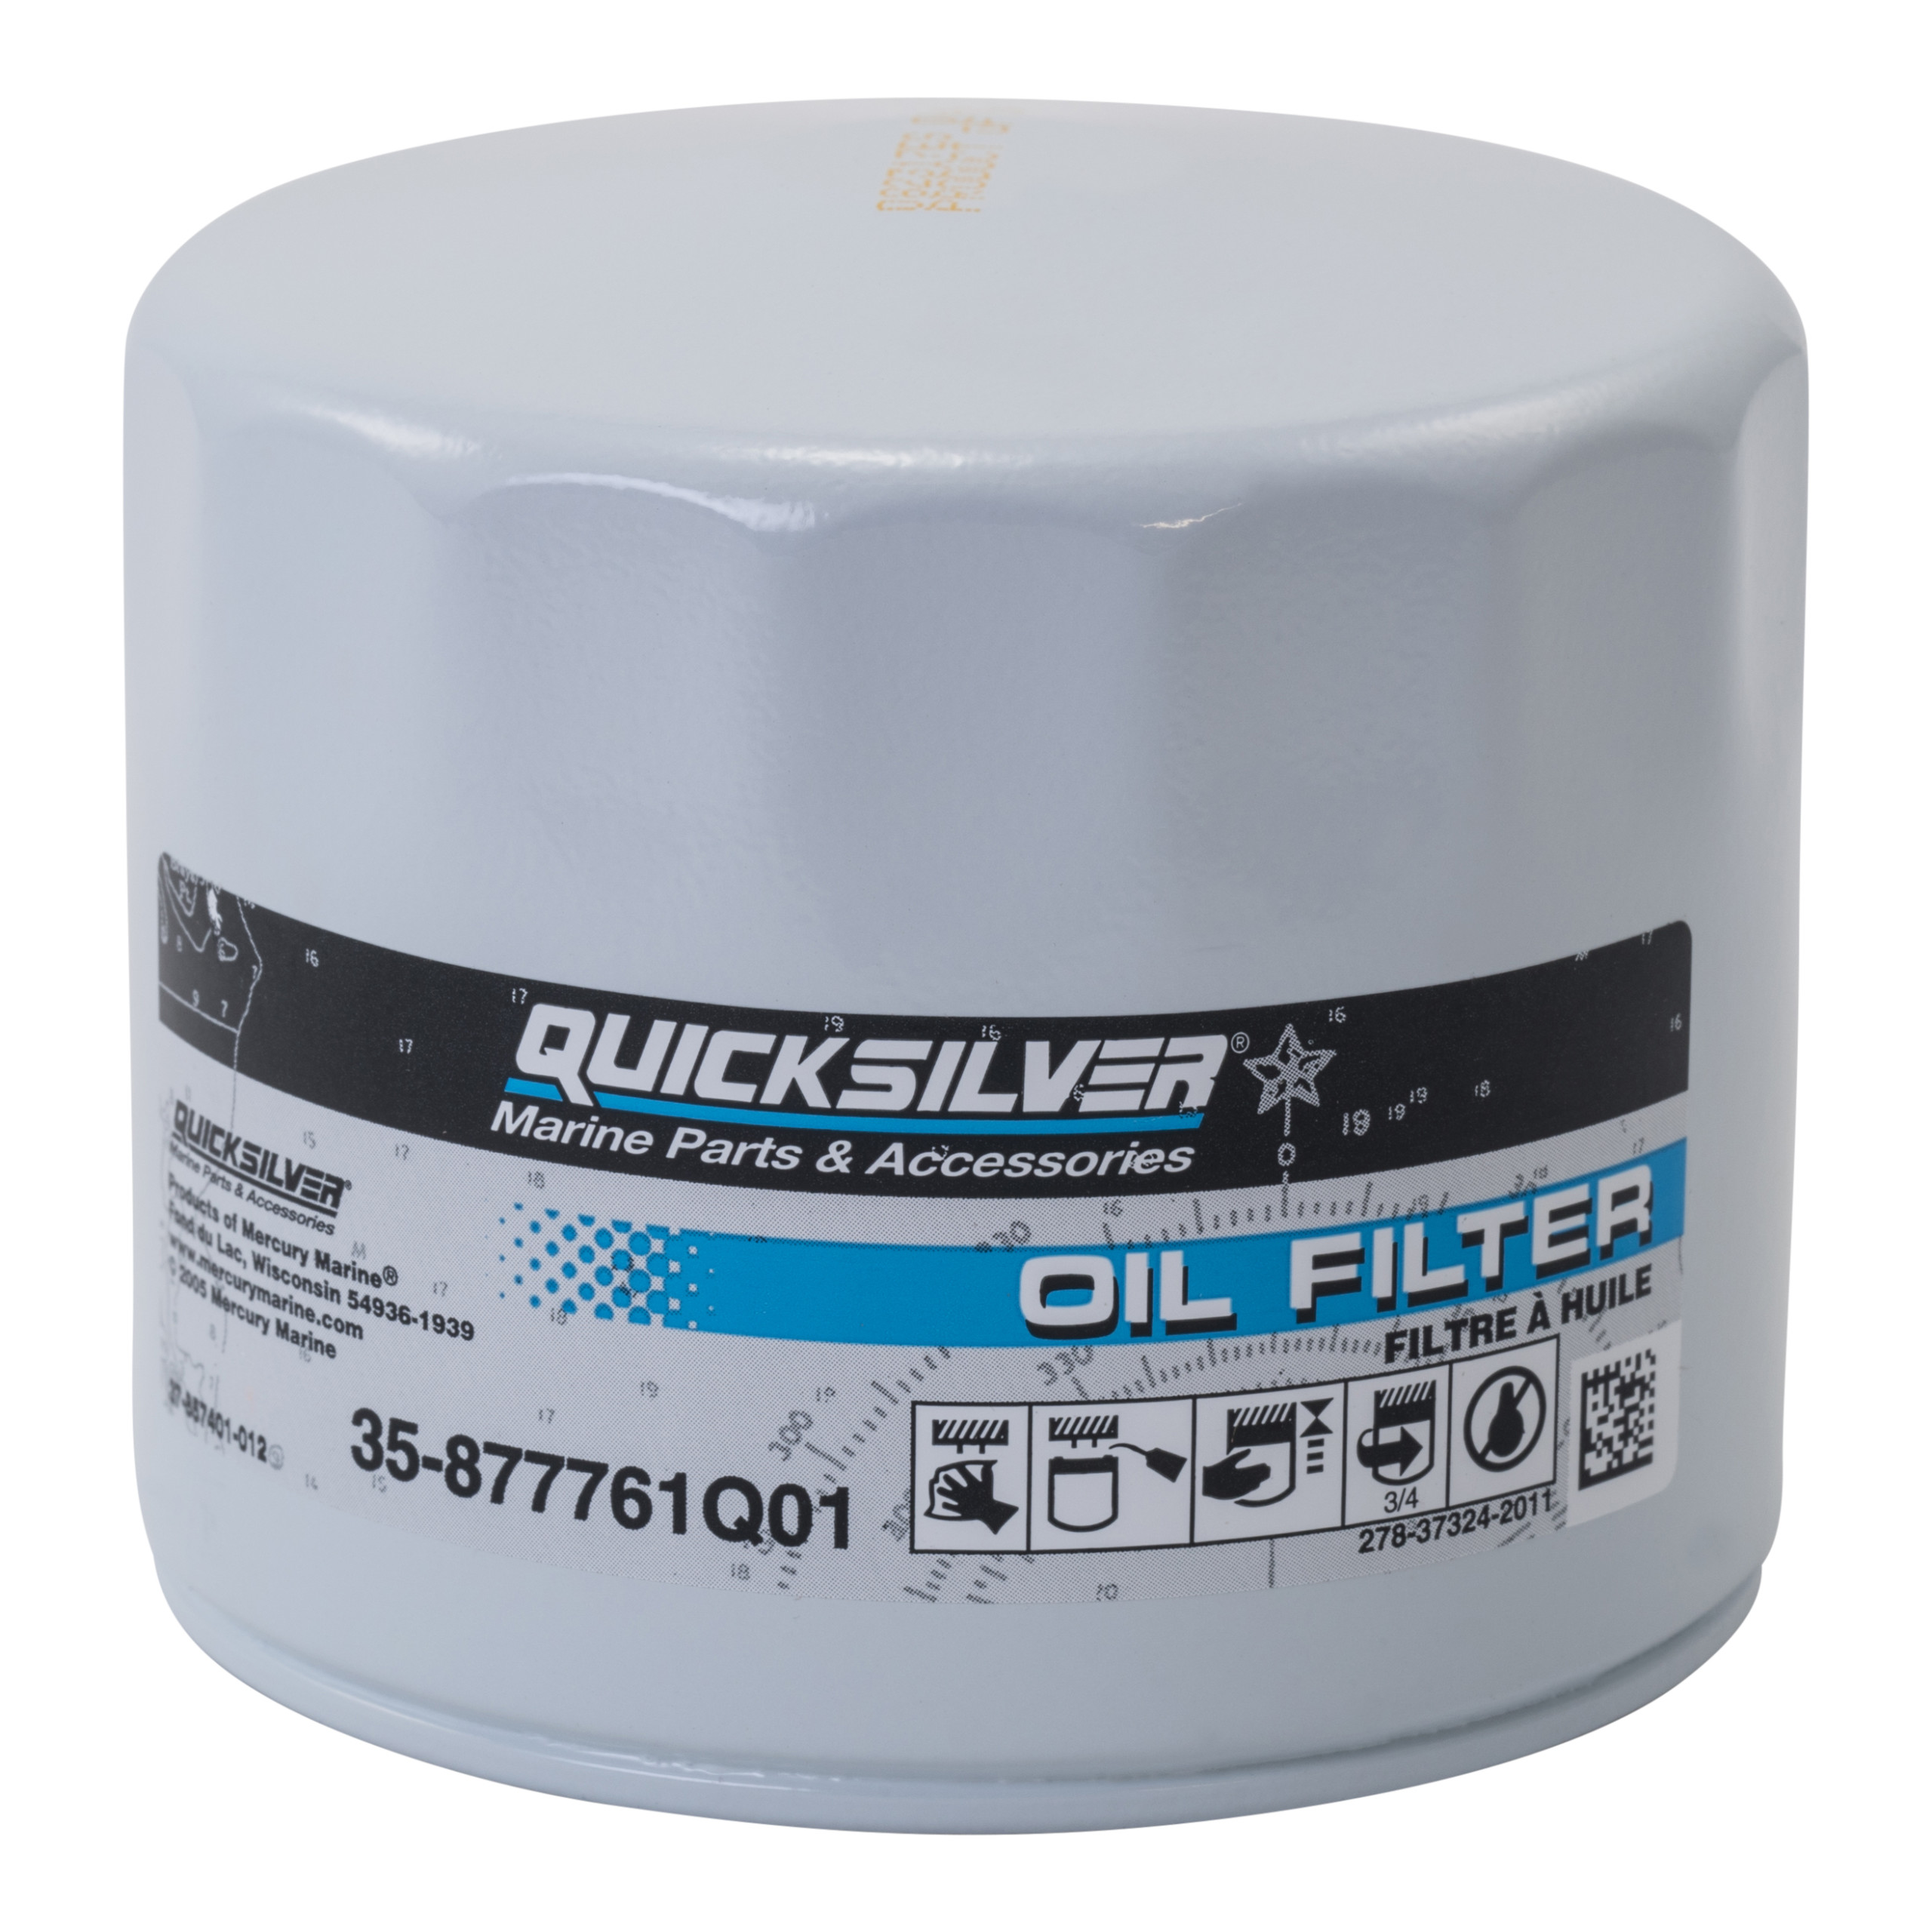 877761Q01 Oil Filter - Mercury and Mariner 75 HP through 115 HP Outboards  and 150 HP EFI 4-Stroke Outboards